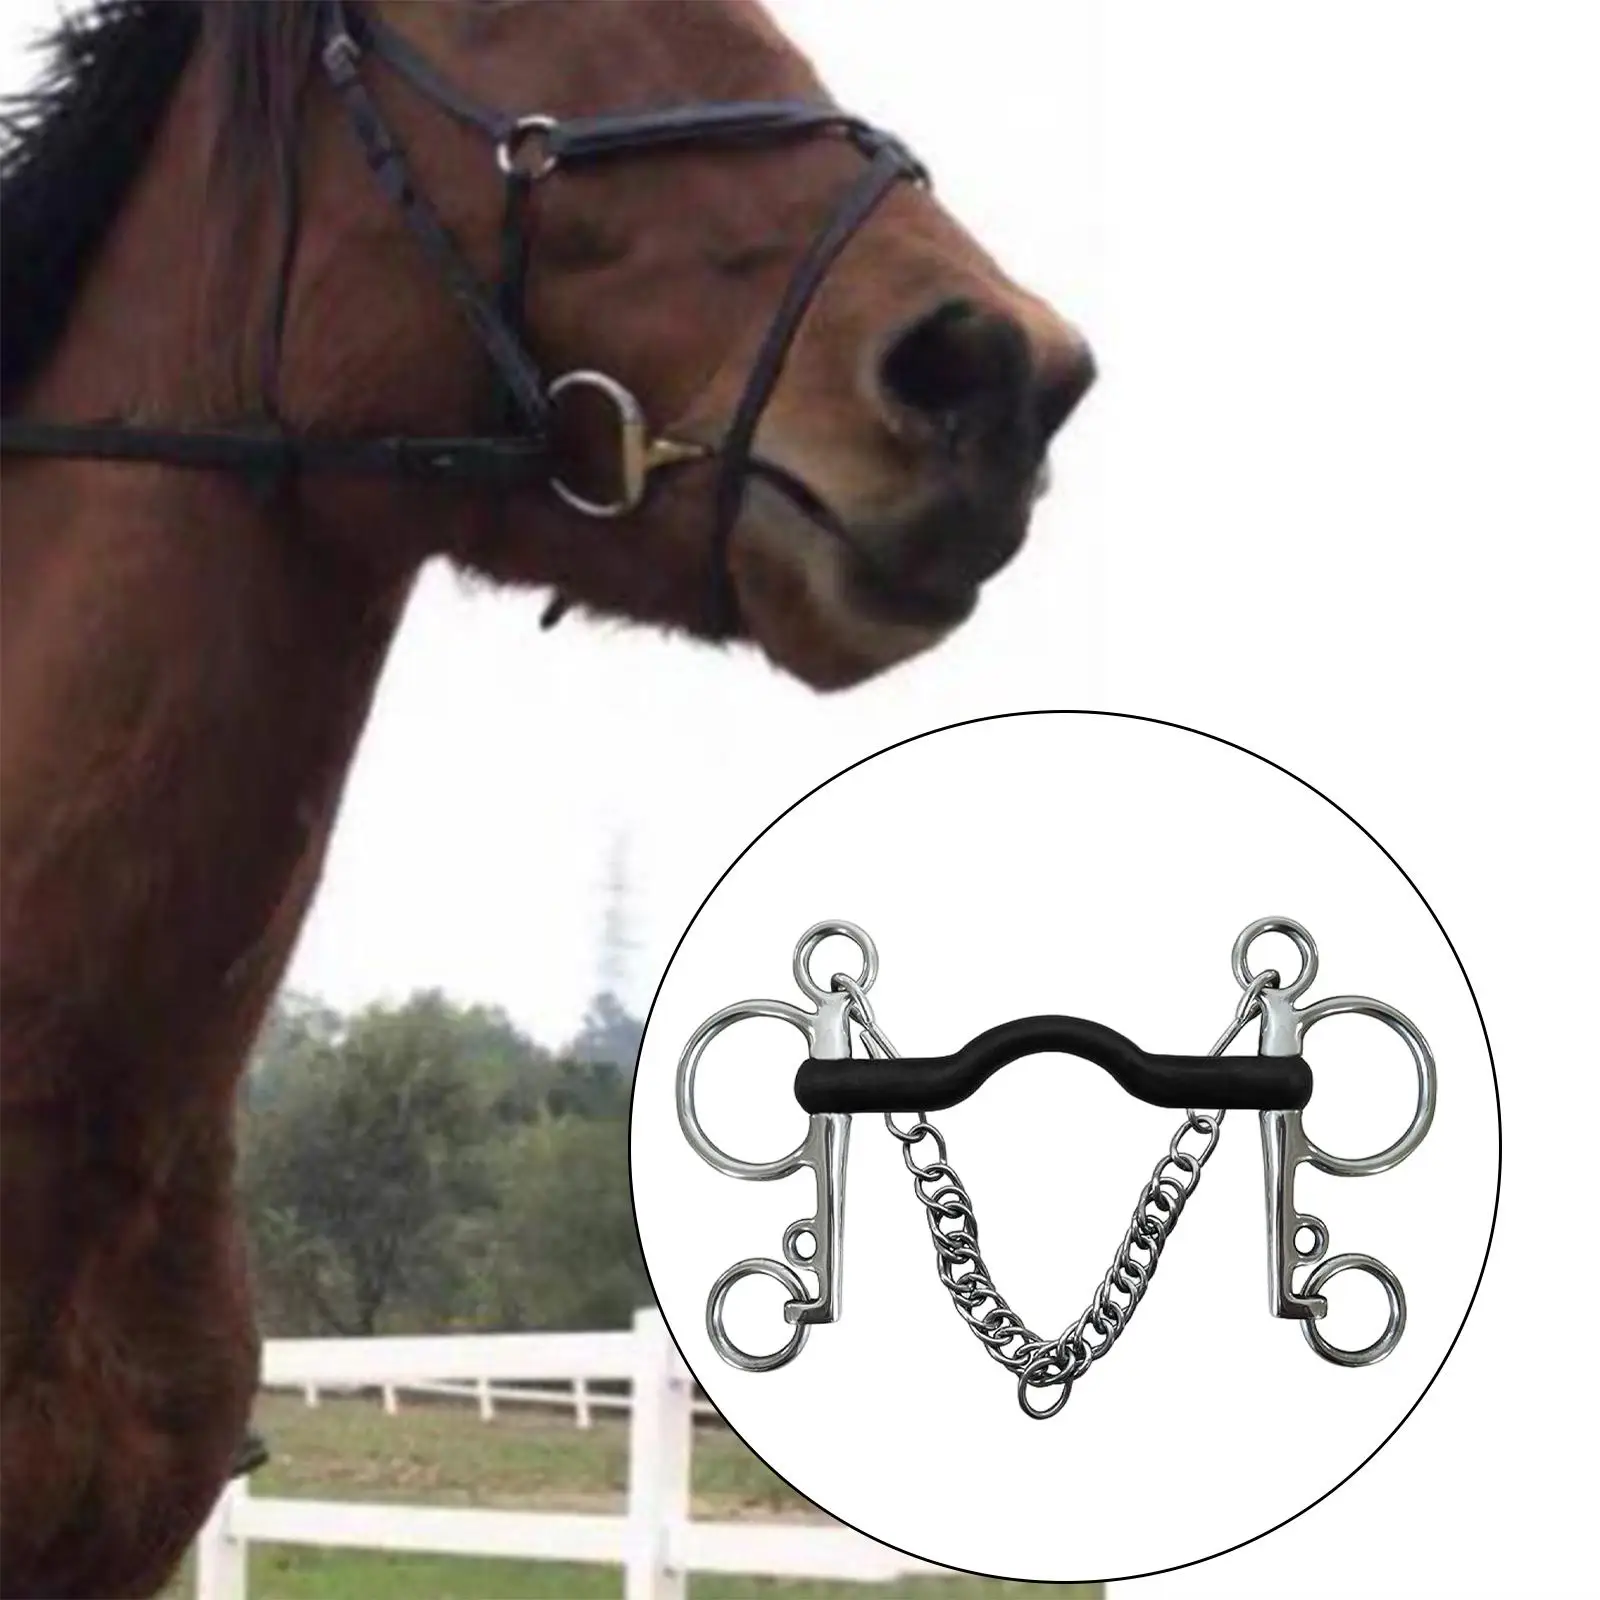 Western Style Horse Bit, Mouth Horse Gag Bit, W/Curb Hooks Chain, Stainless Steel Harness, Cheek for Performance Equestrian